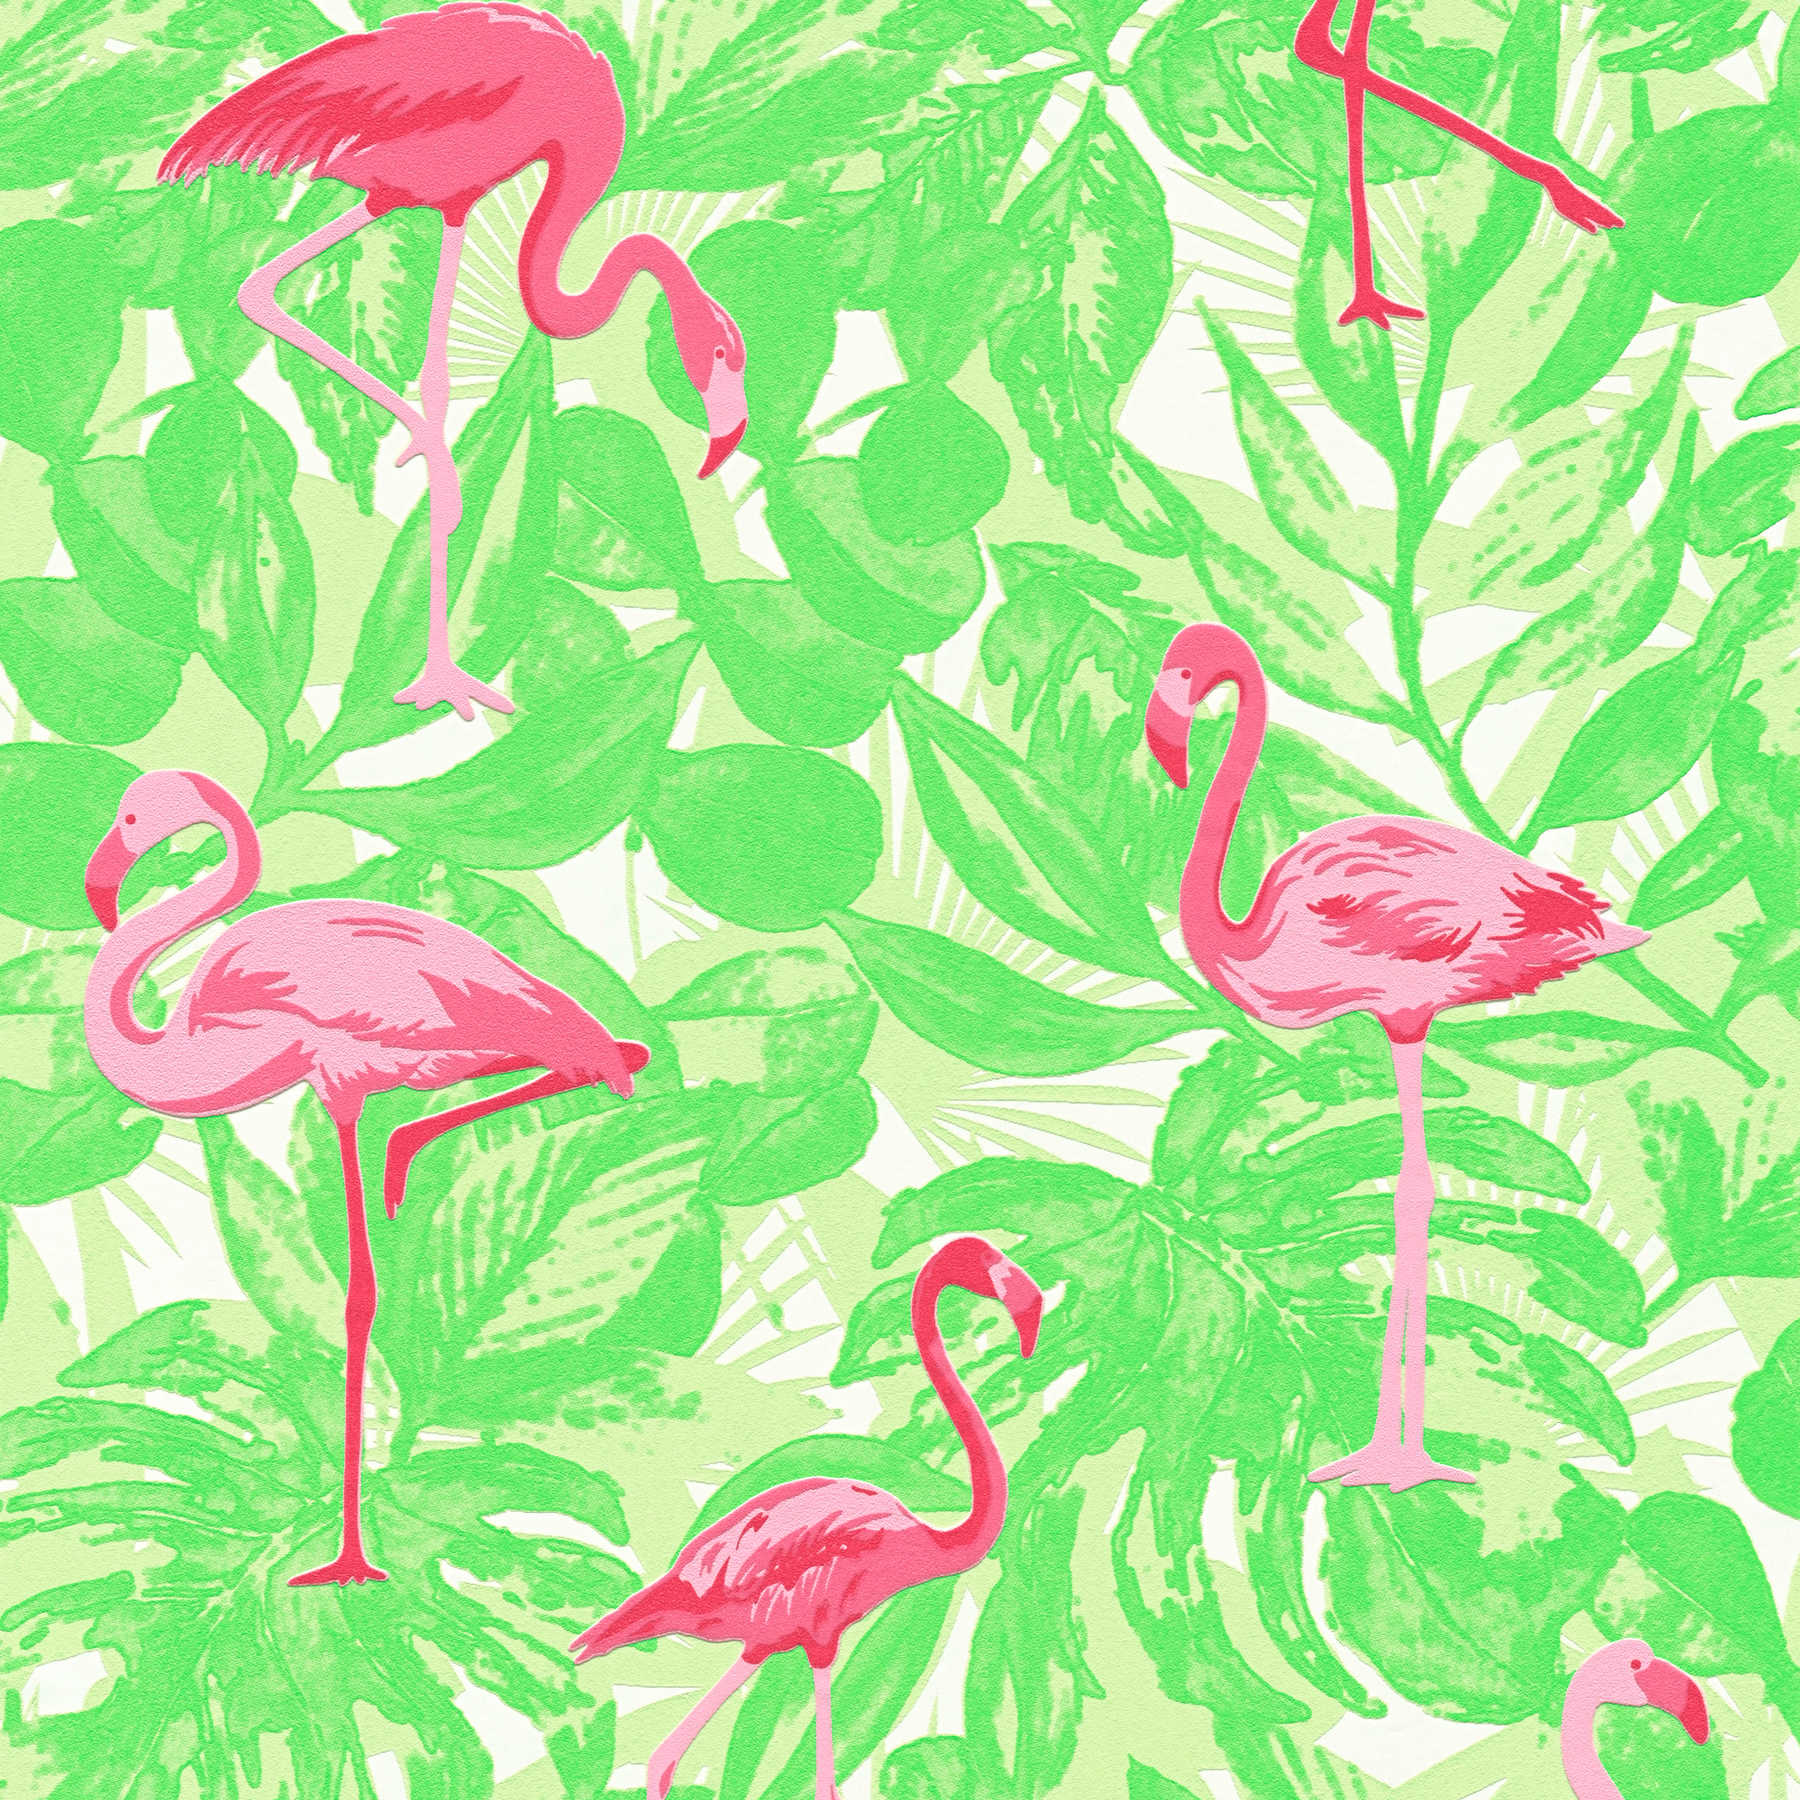         Tropical wallpaper with flamingo & leaves - pink, green
    